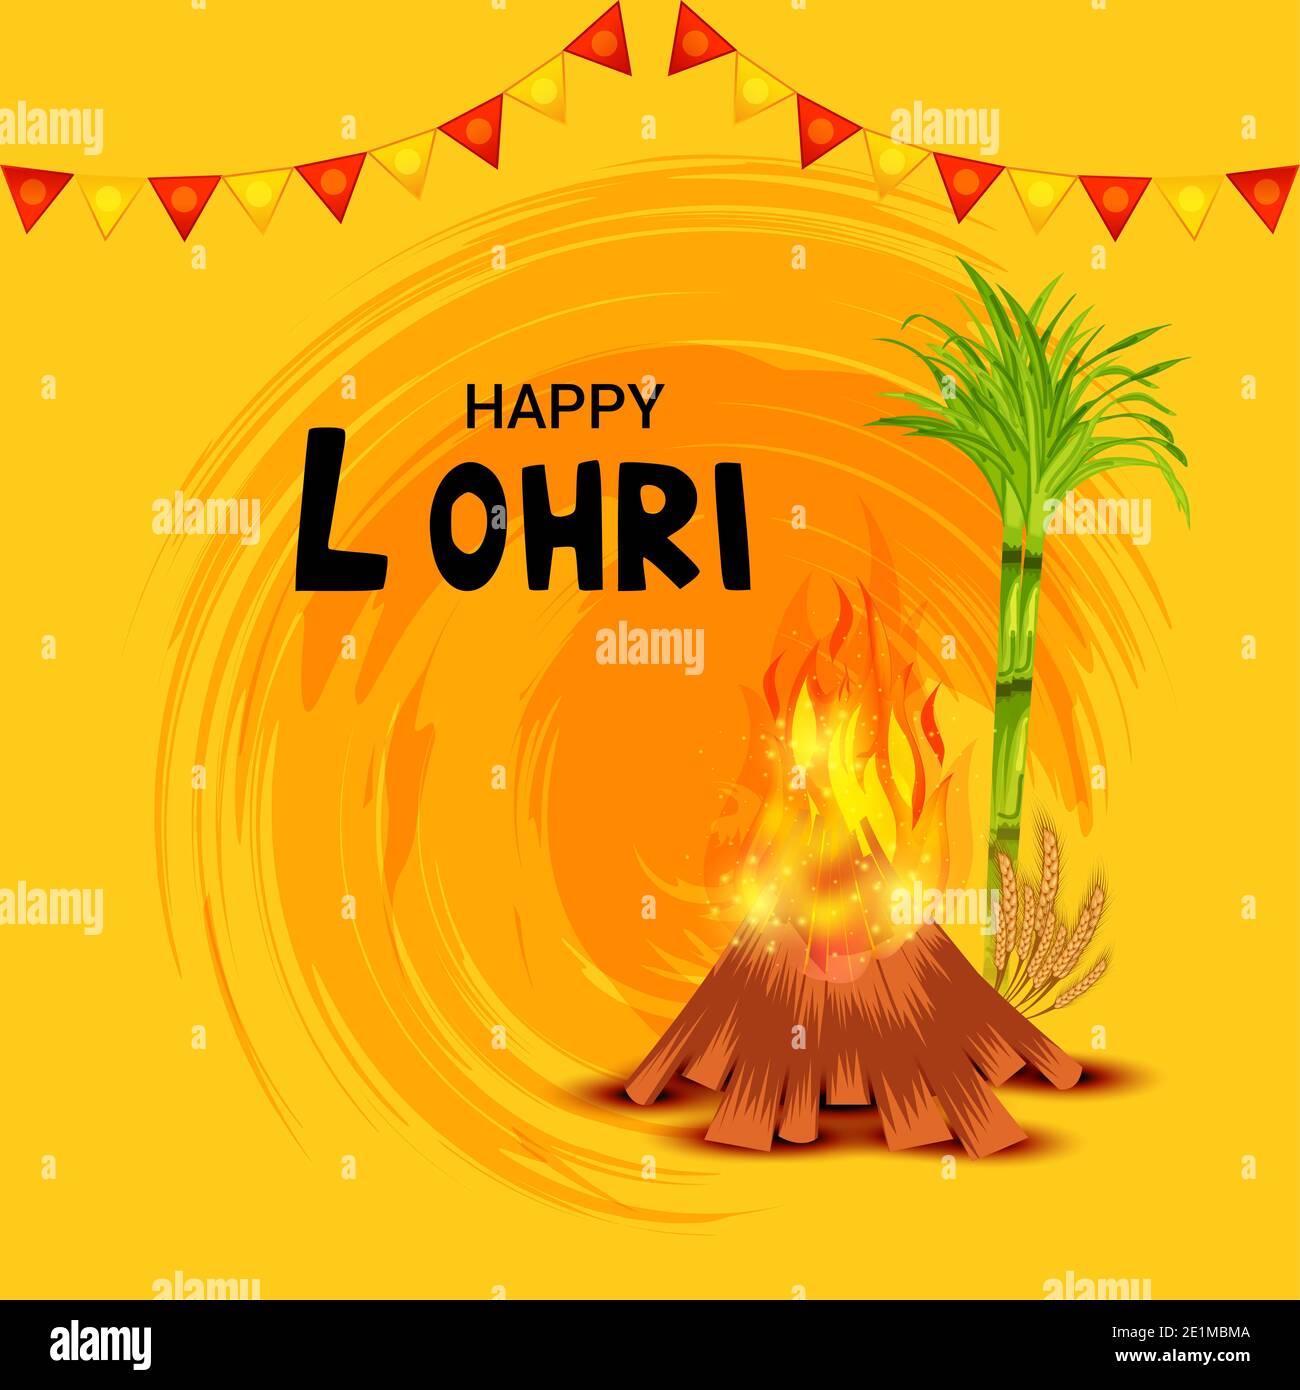 Vector illustration of a Background for Happy Lohri holiday Template for  Punjabi Festival Stock Photo - Alamy